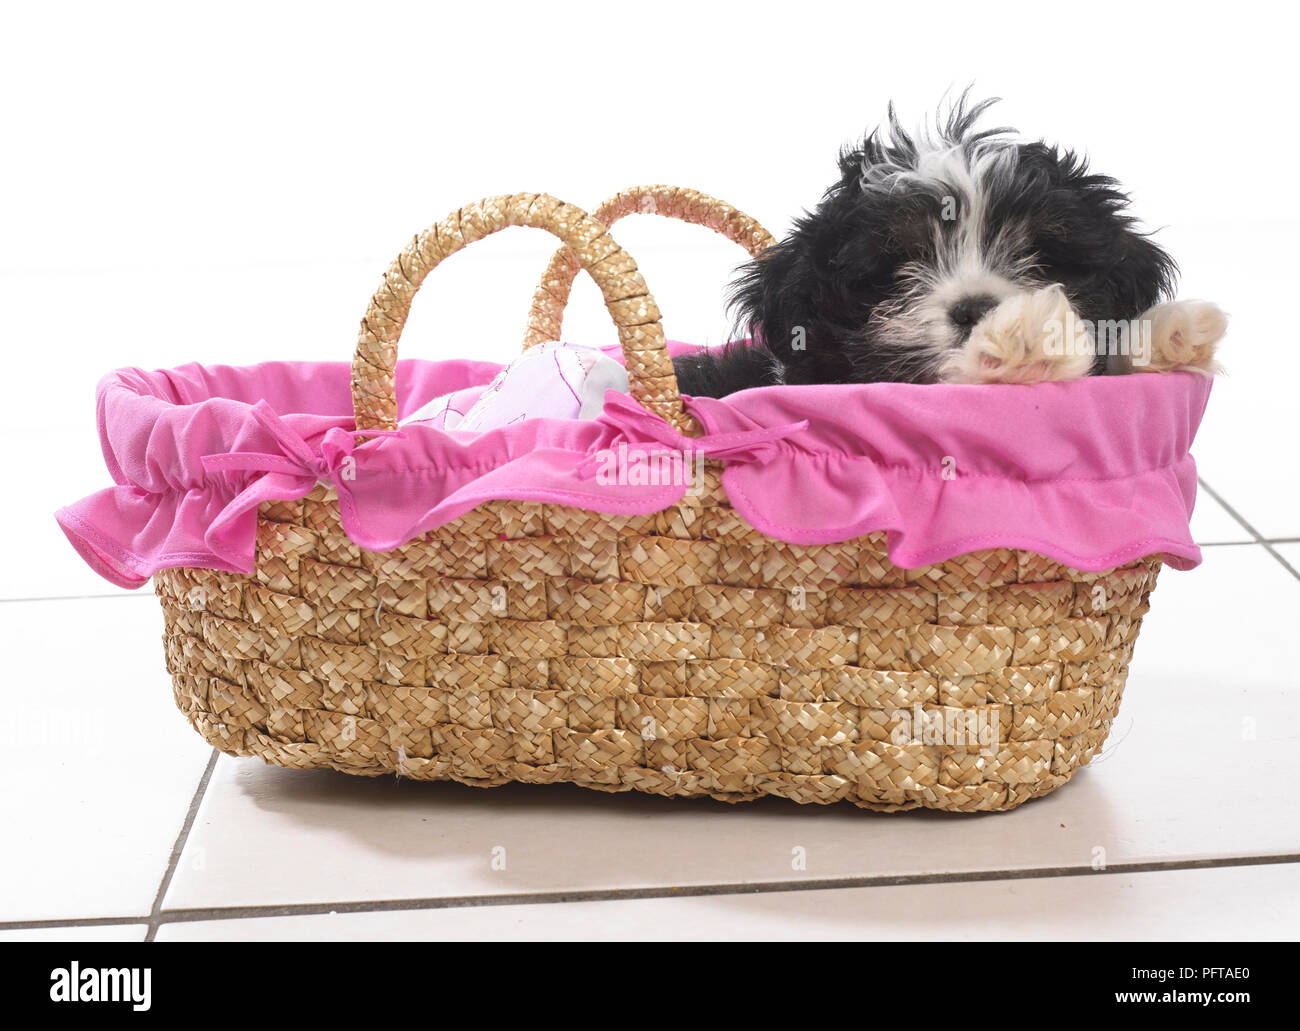 Black and white puppy sitting in pink fabric lined wicker basket Stock Photo